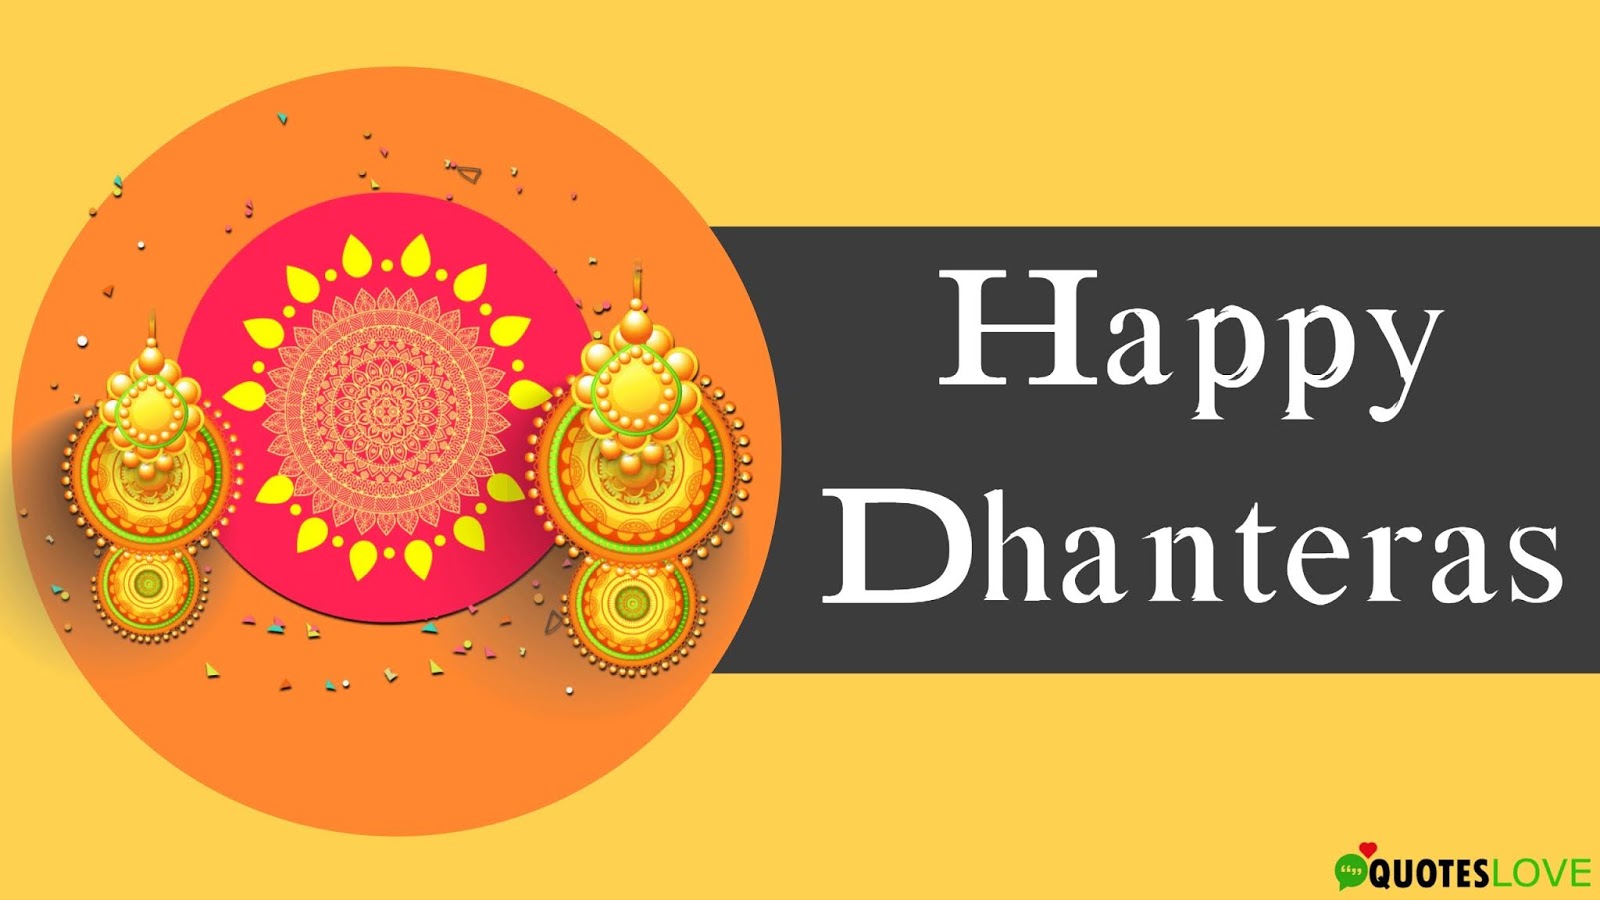 Happy Dhanteras Wishes Images - Happy Dhanteras Images 2019 - 1600x900  Wallpaper 